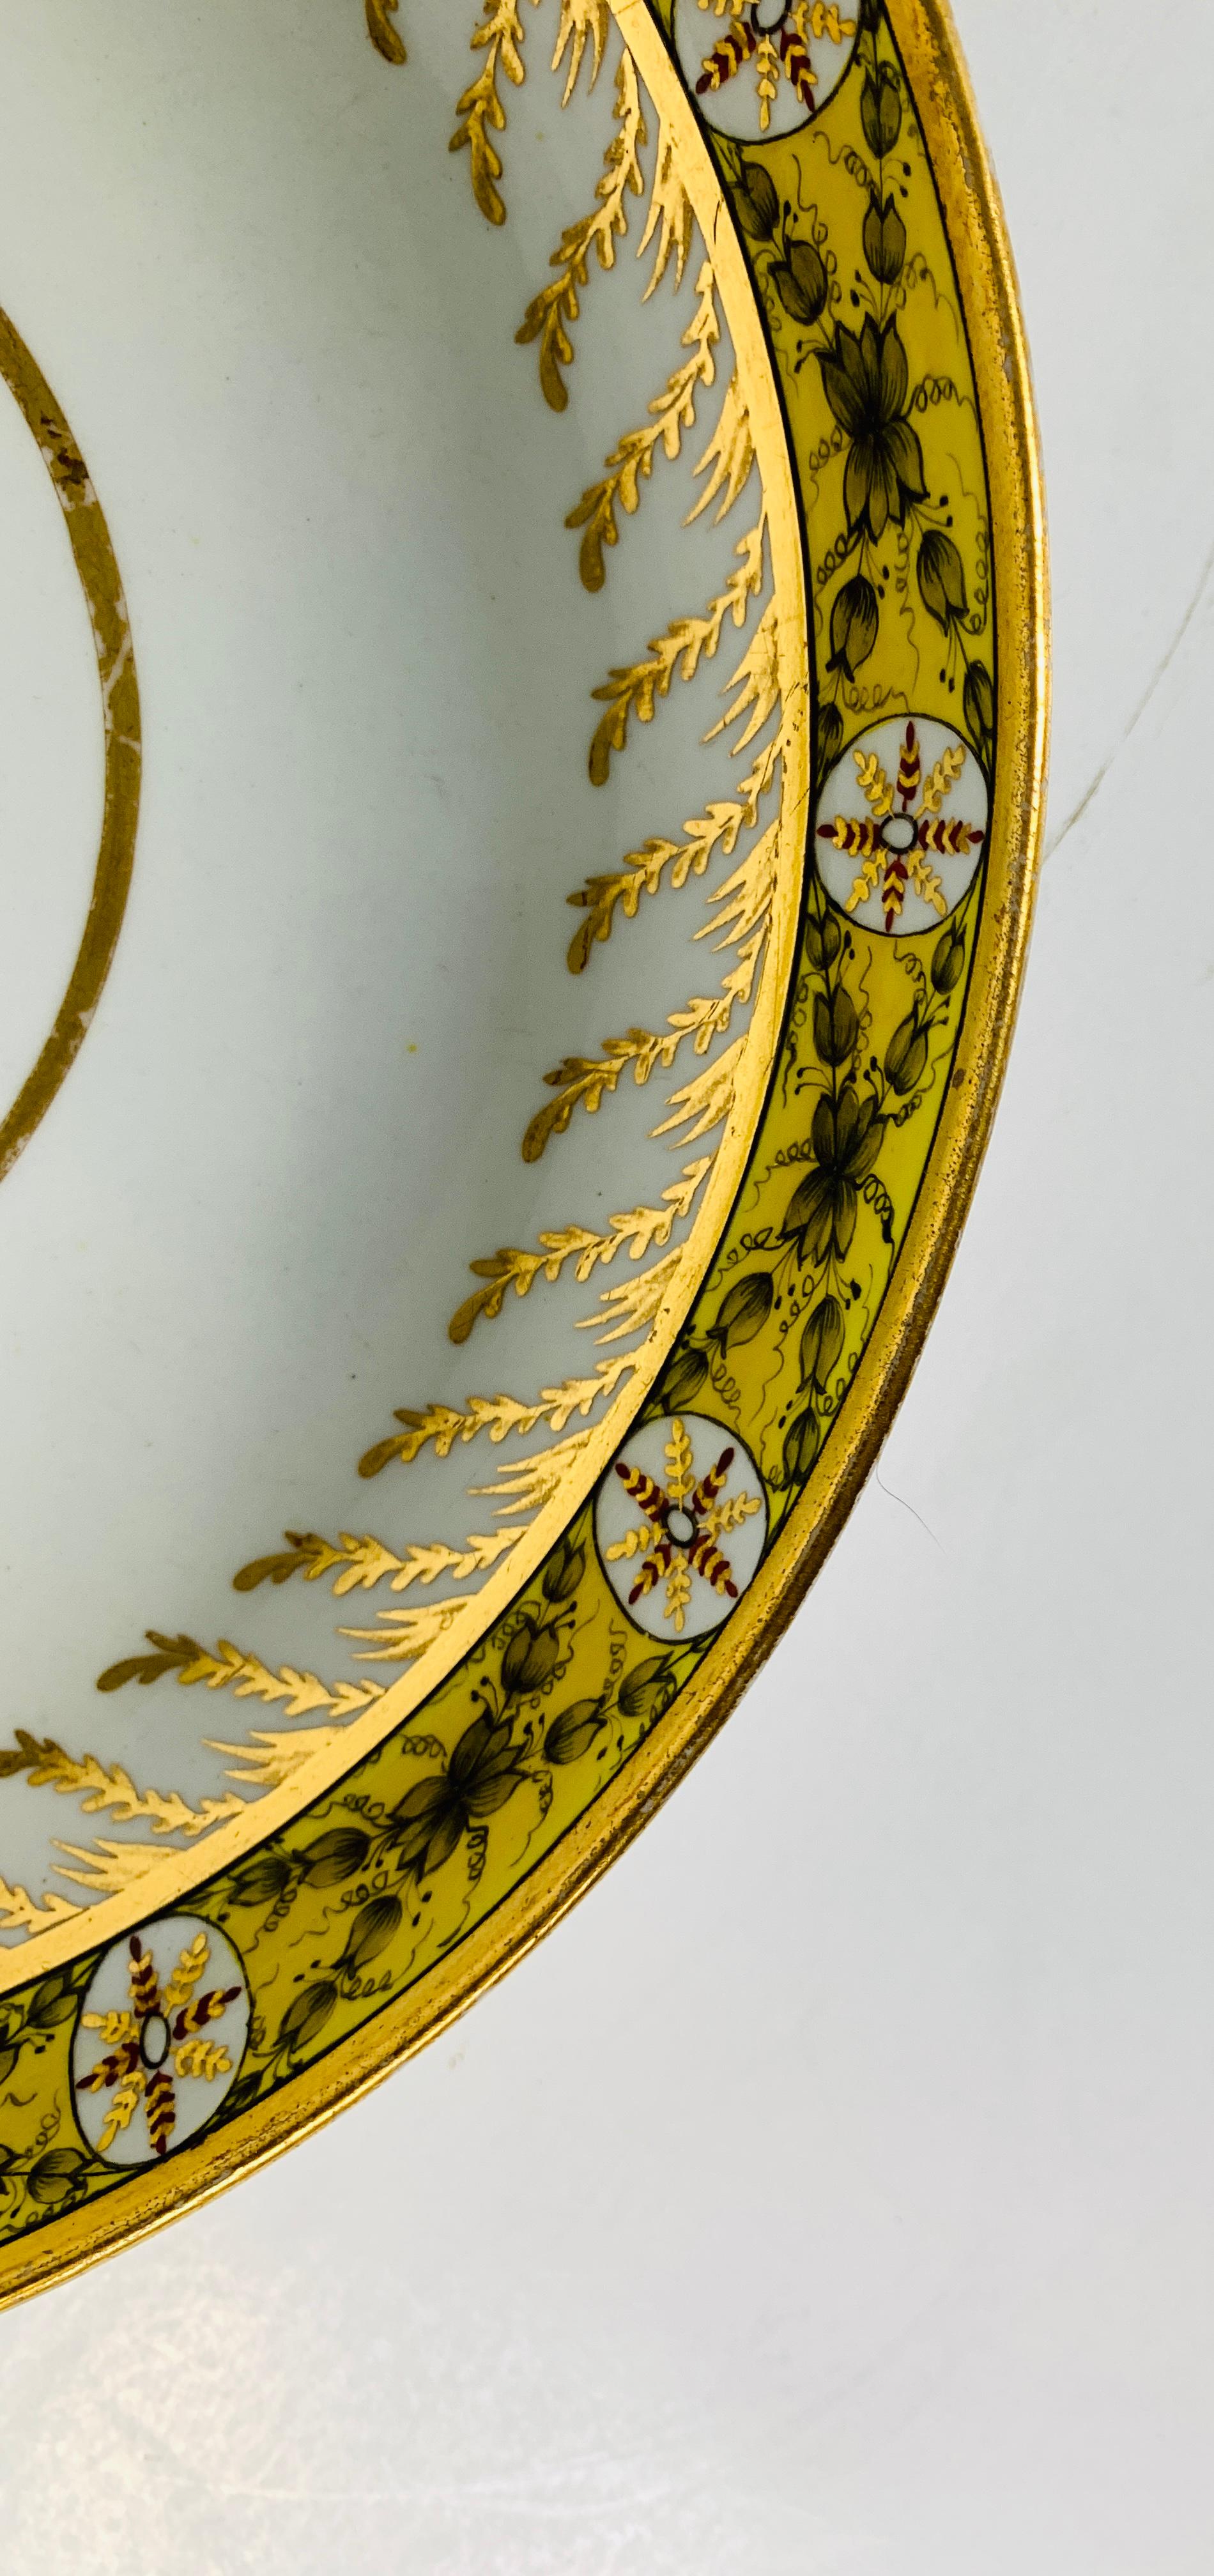 19th Century Yellow English Porcelain Dish with Neoclassical Design Circa 1800